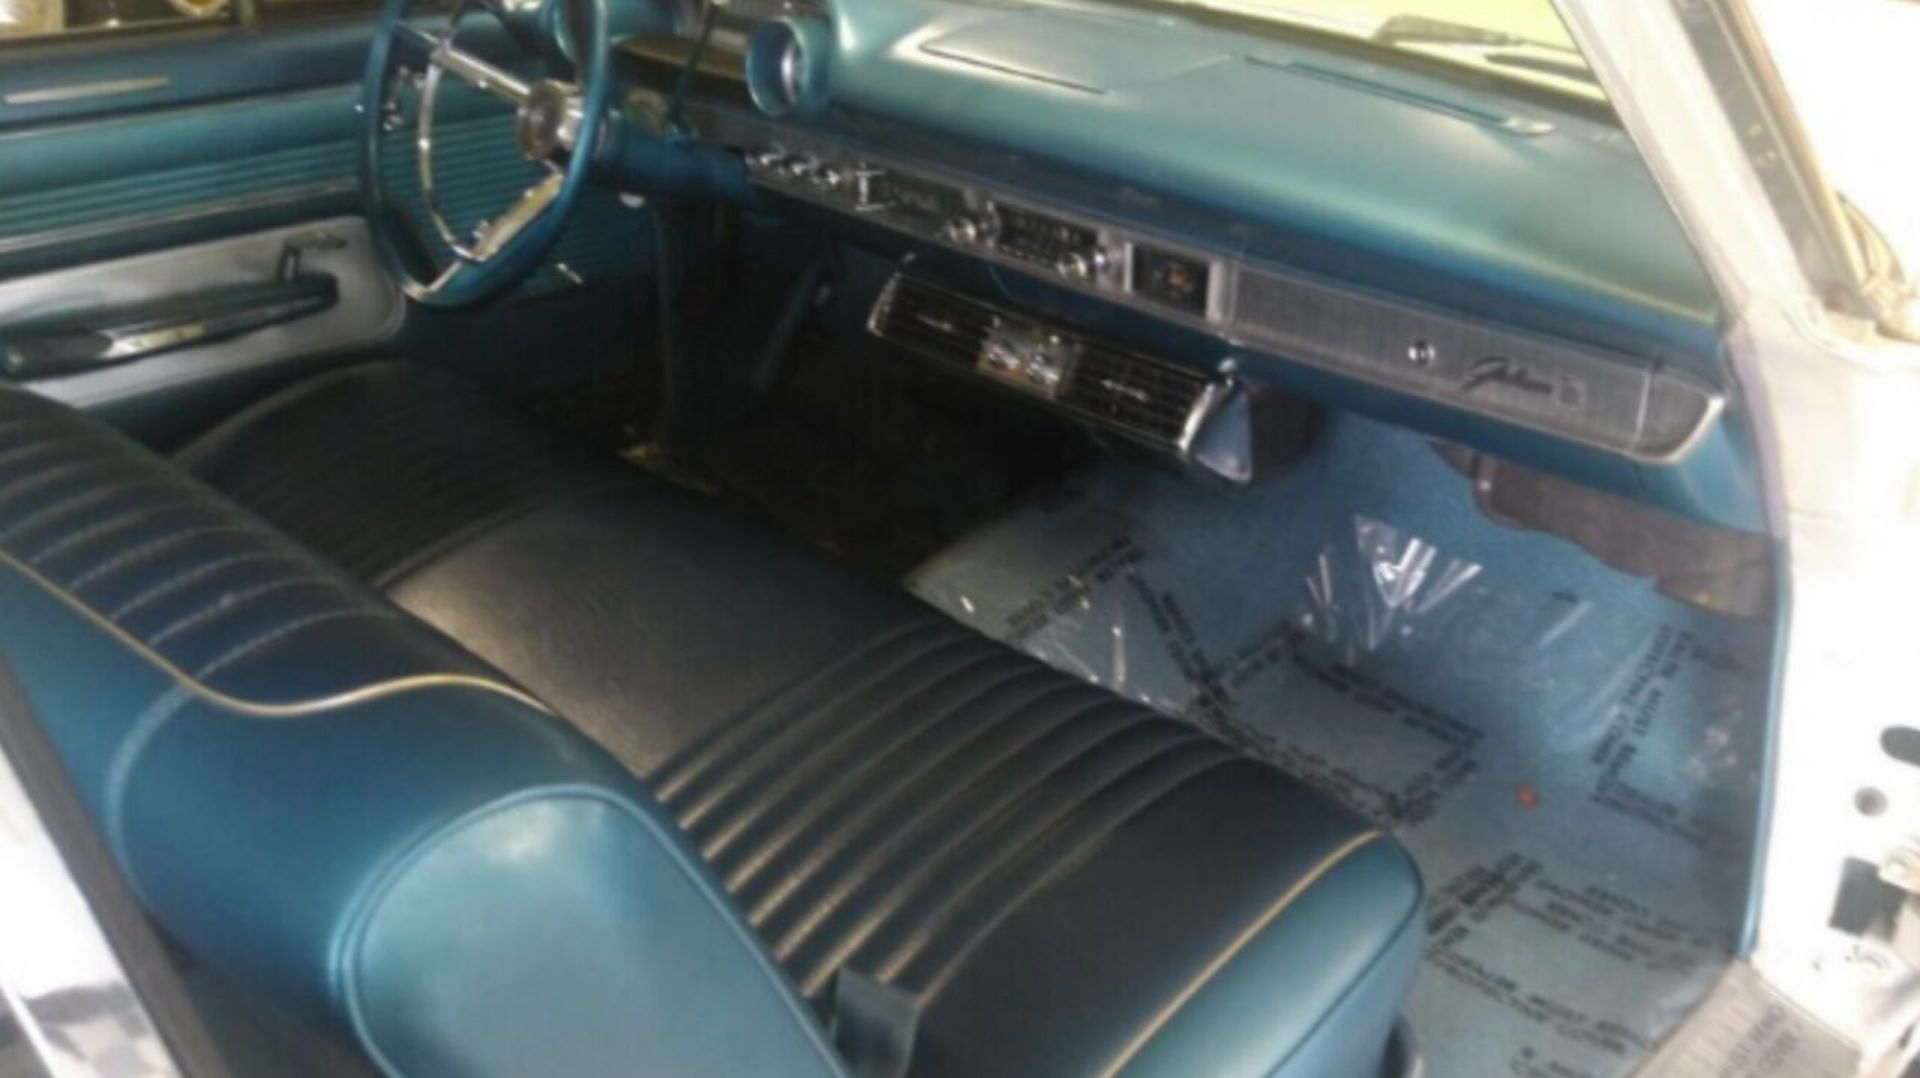 1963 Ford Galaxie 500 Sportsroof - Image 7 of 9